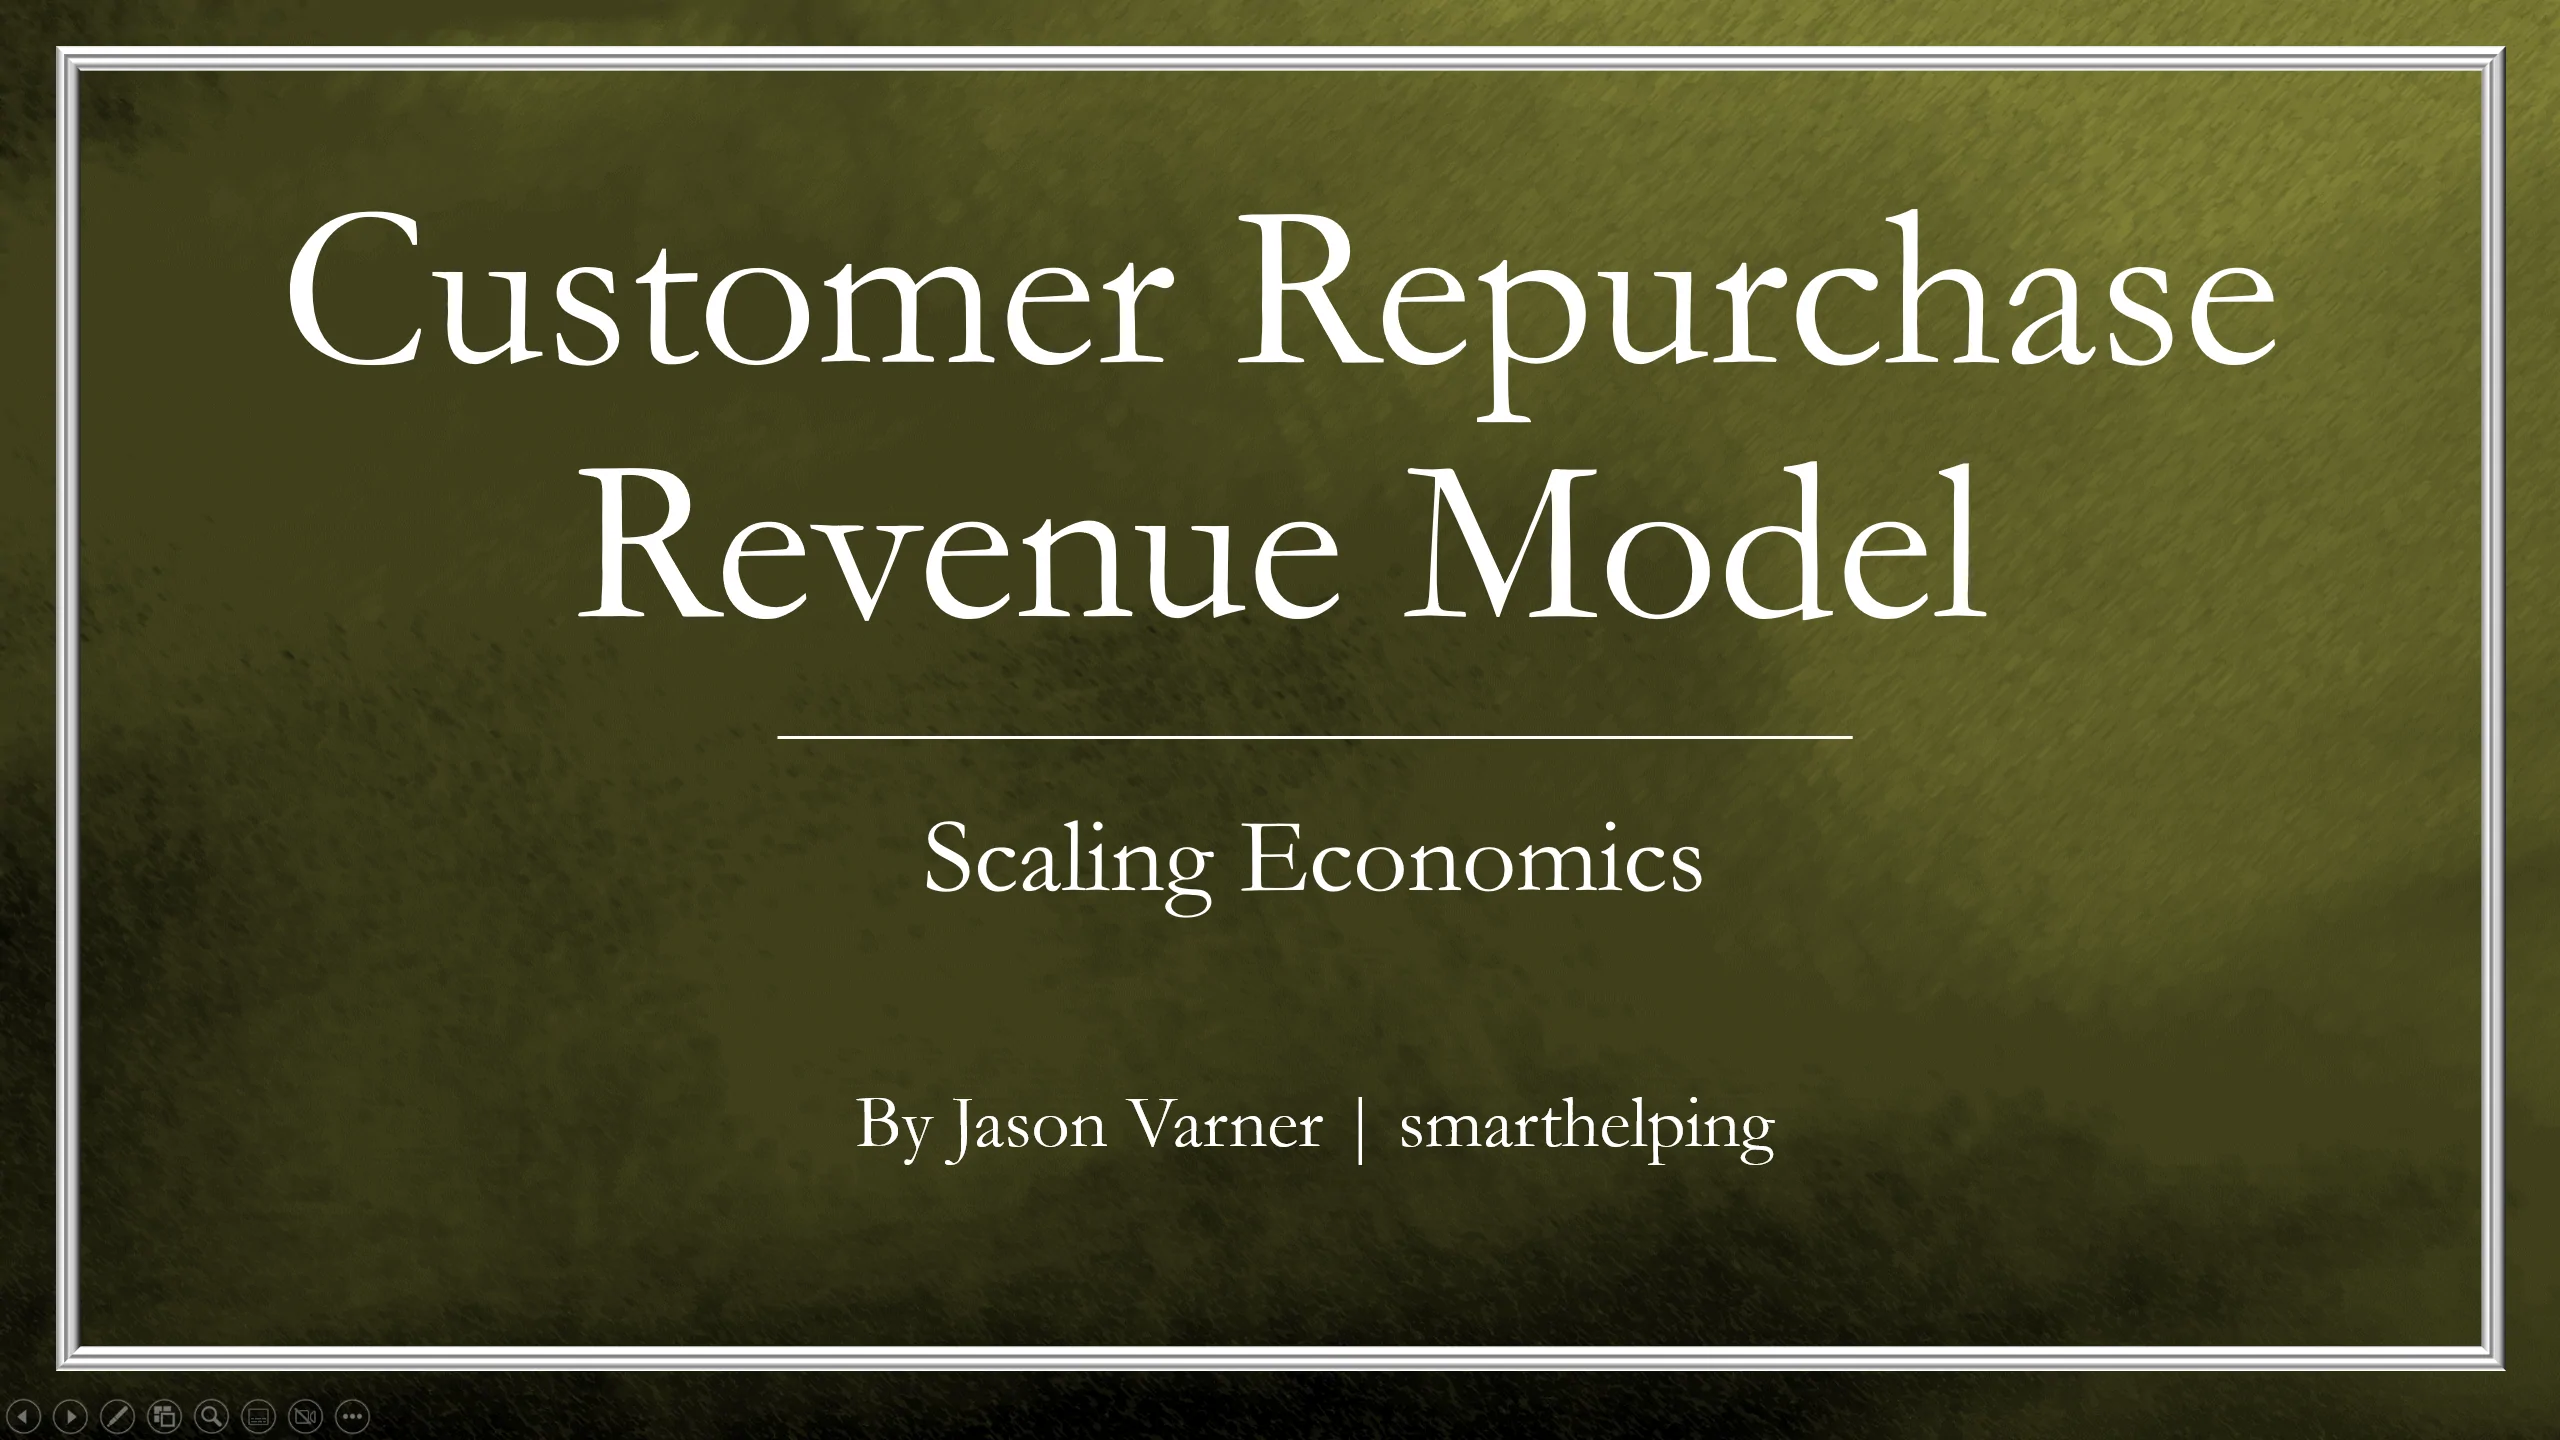 Manufacturing Sales Model: Driven off Customer Repurchase Logic